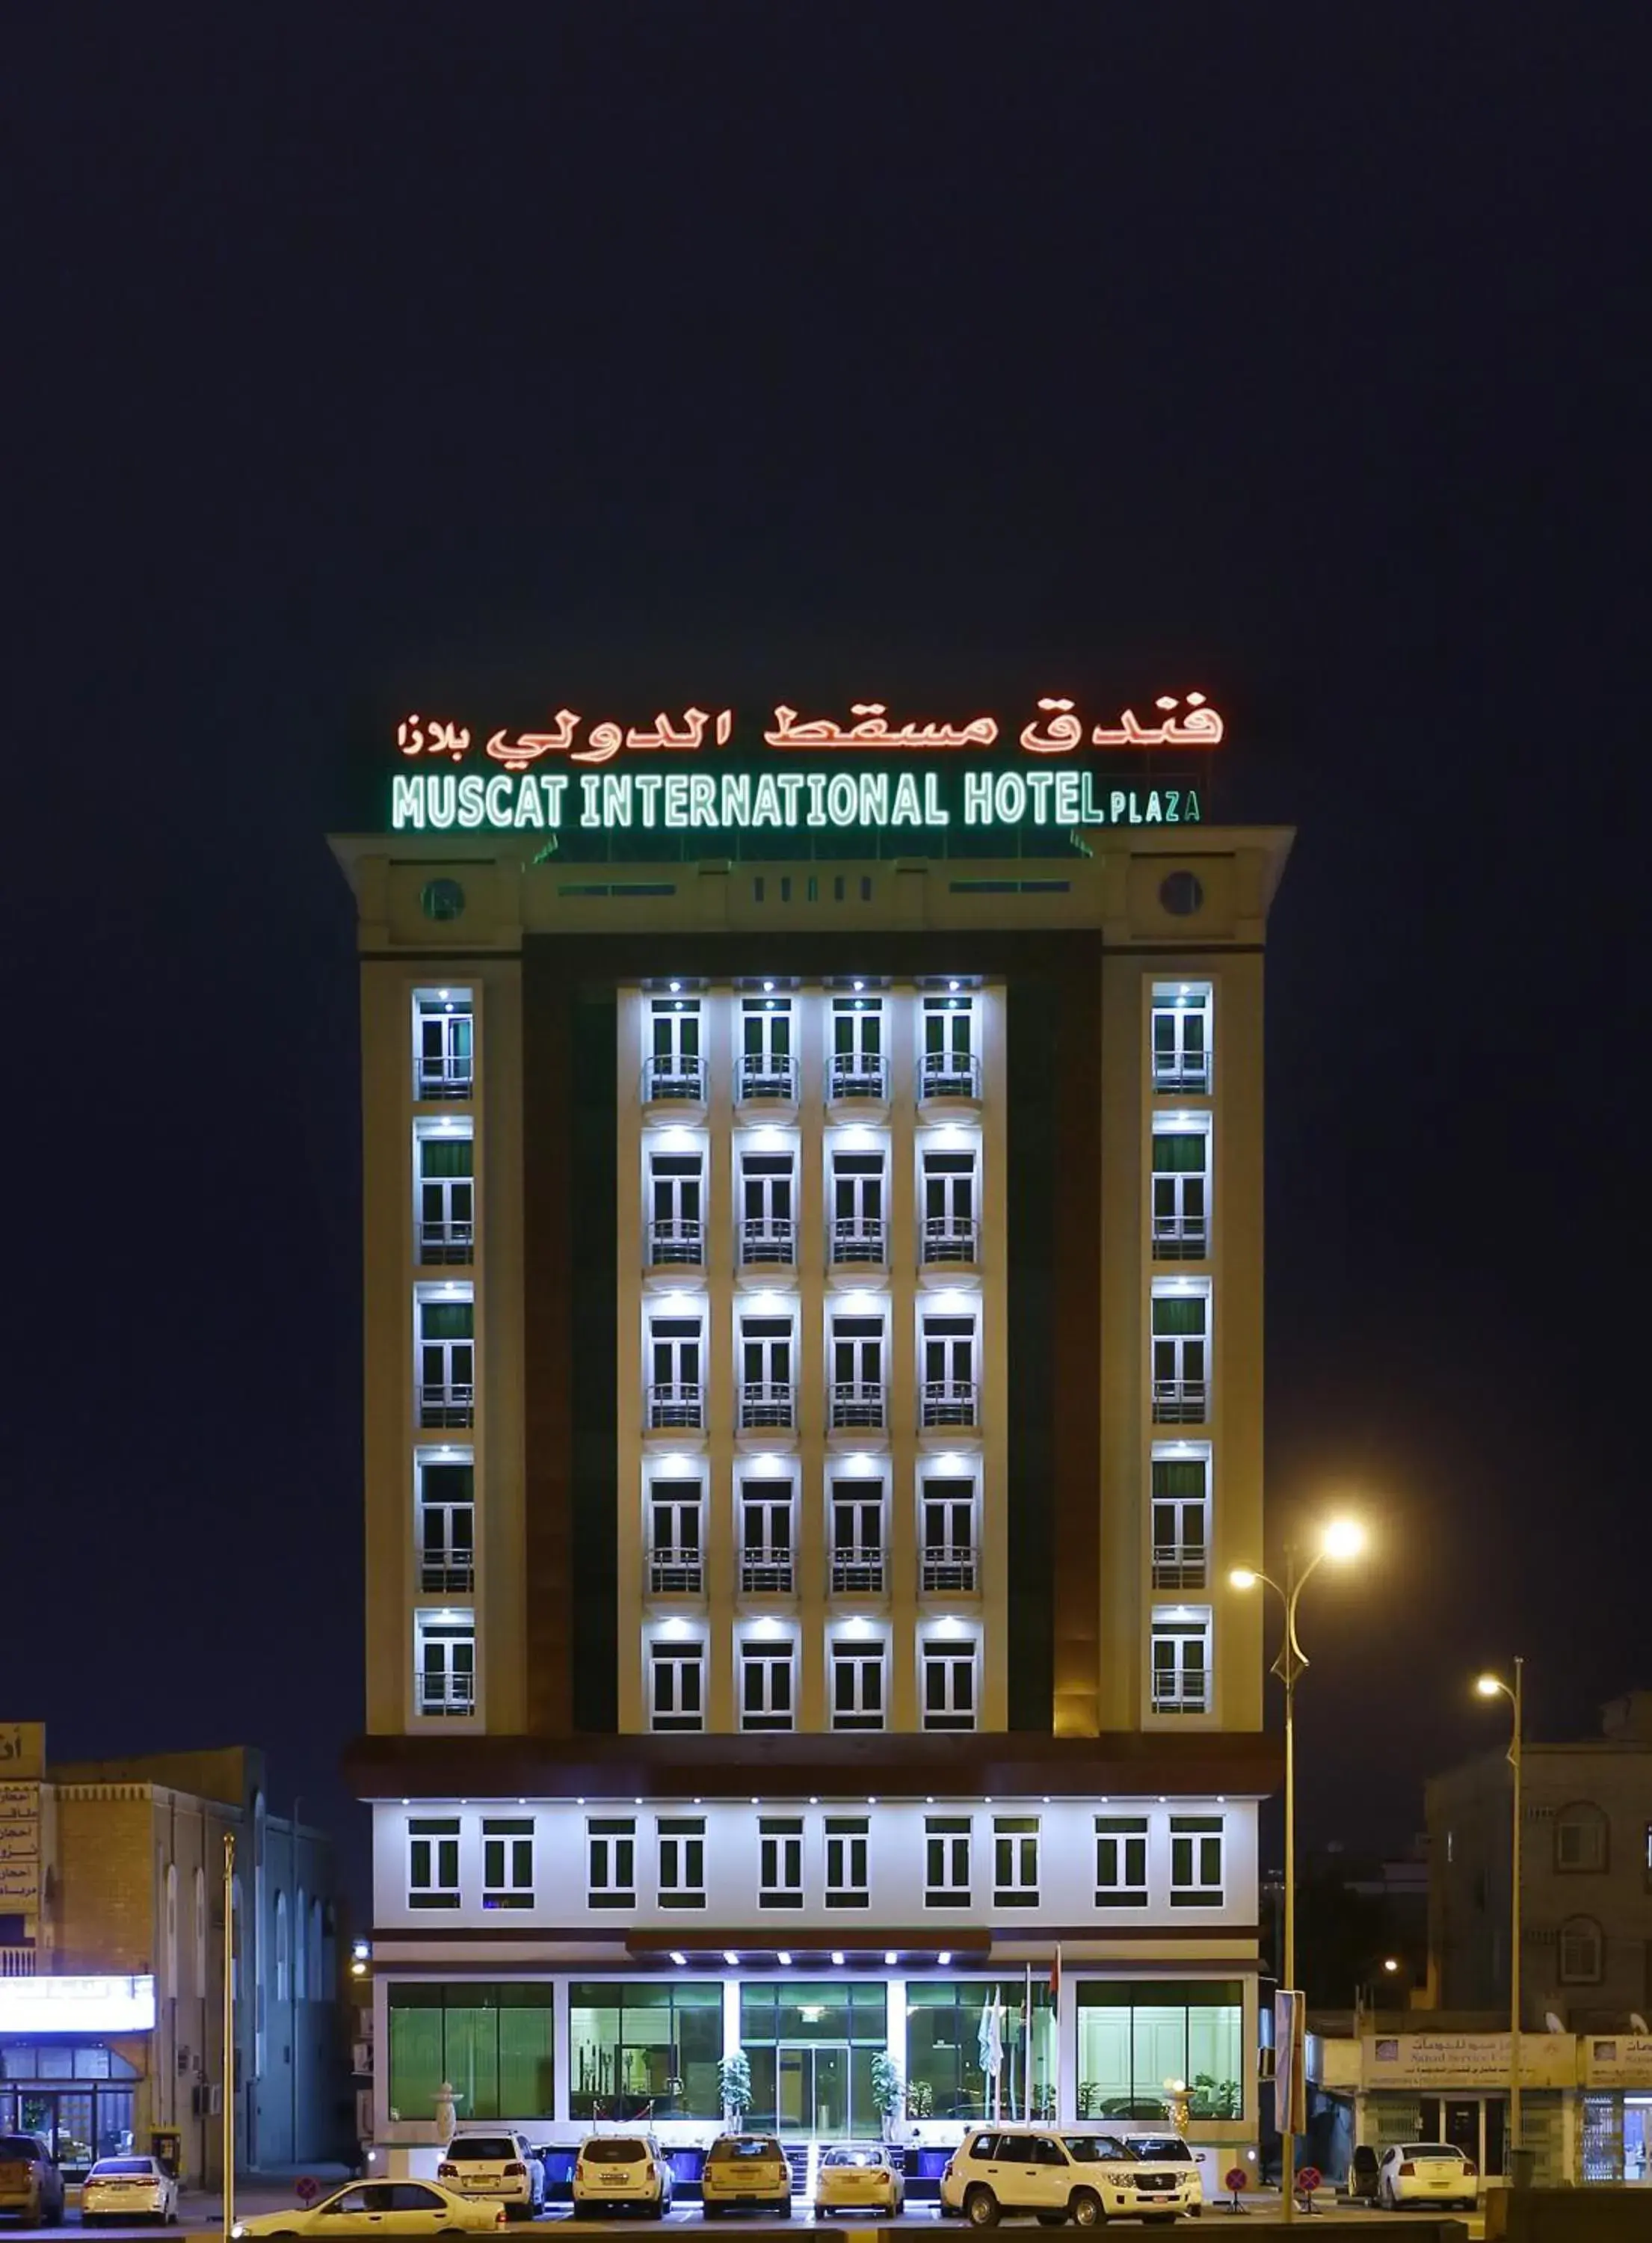 Property Building in Muscat International Hotel Plaza